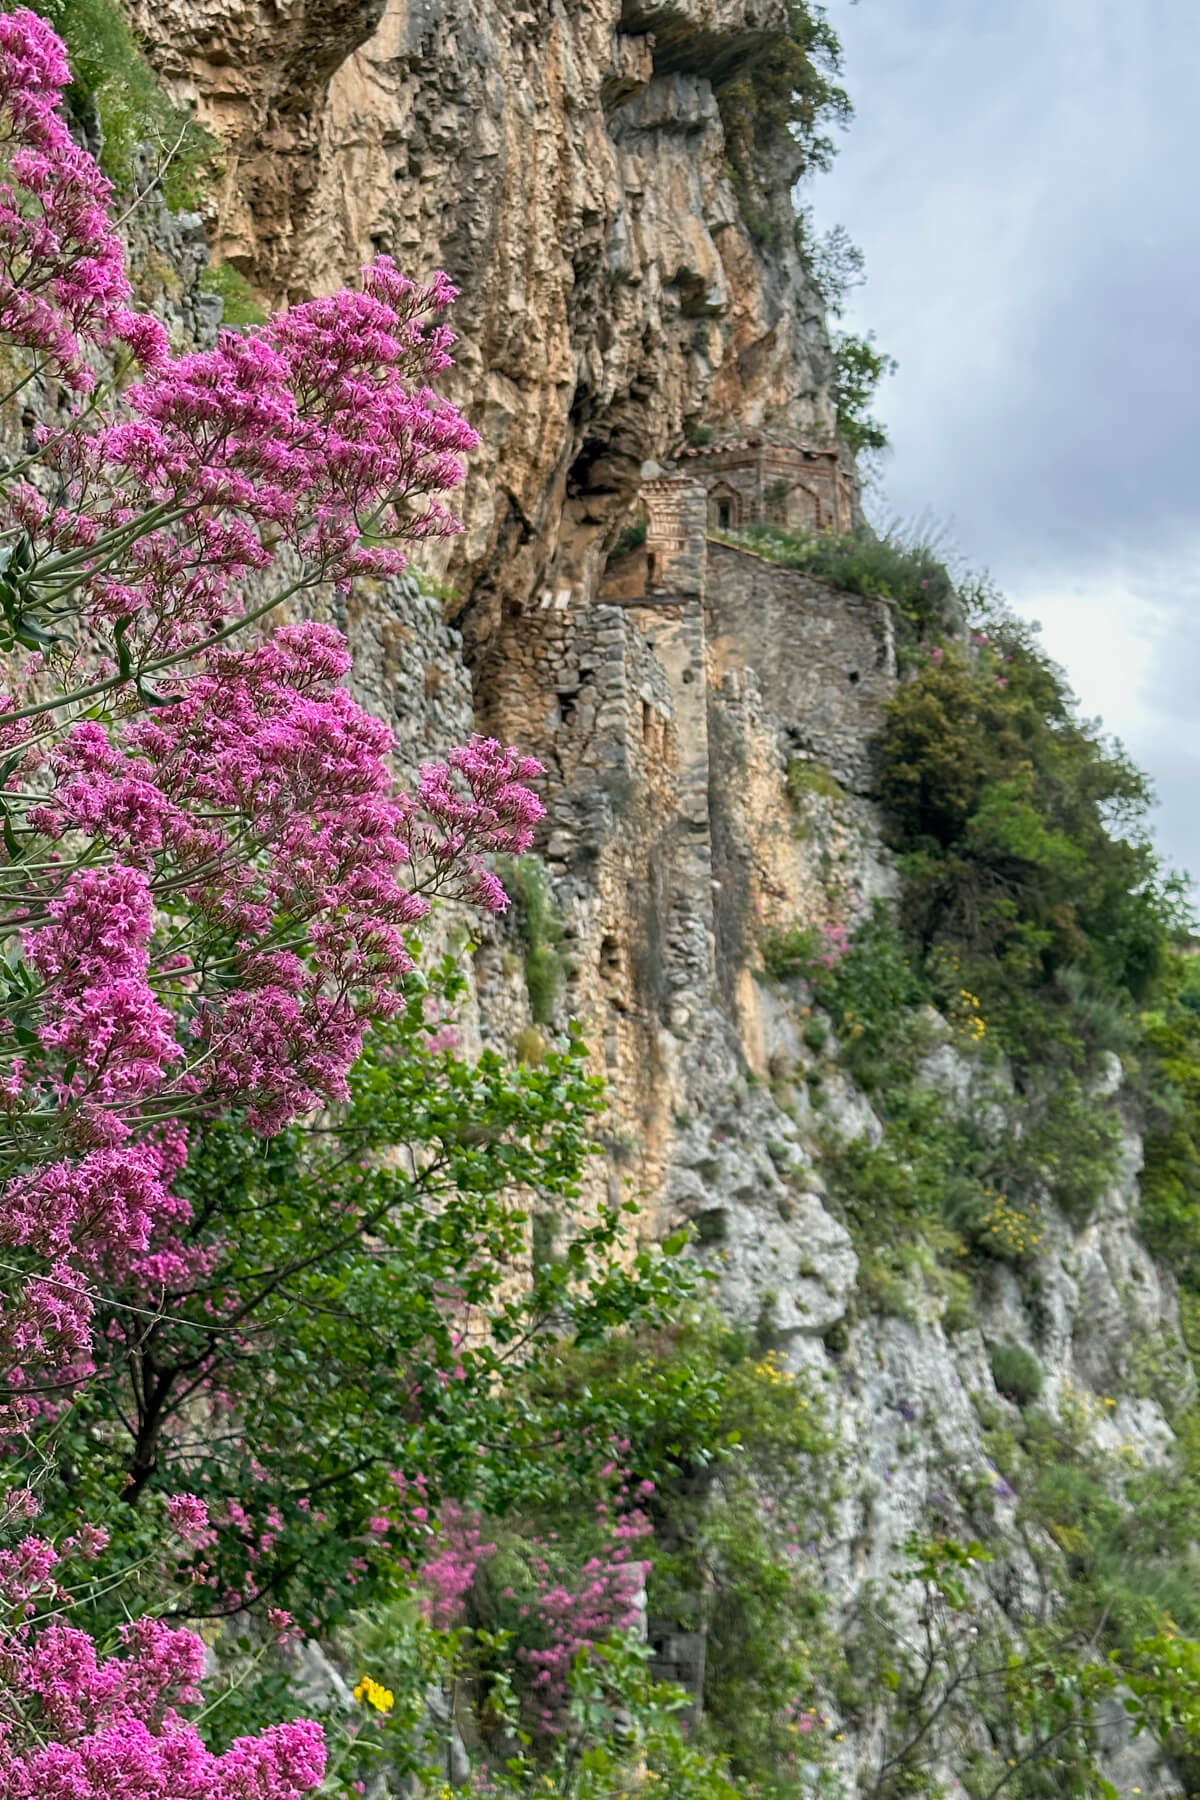 The side of the cliff in the Lousios Gorge with the old Philosopher's Monastery